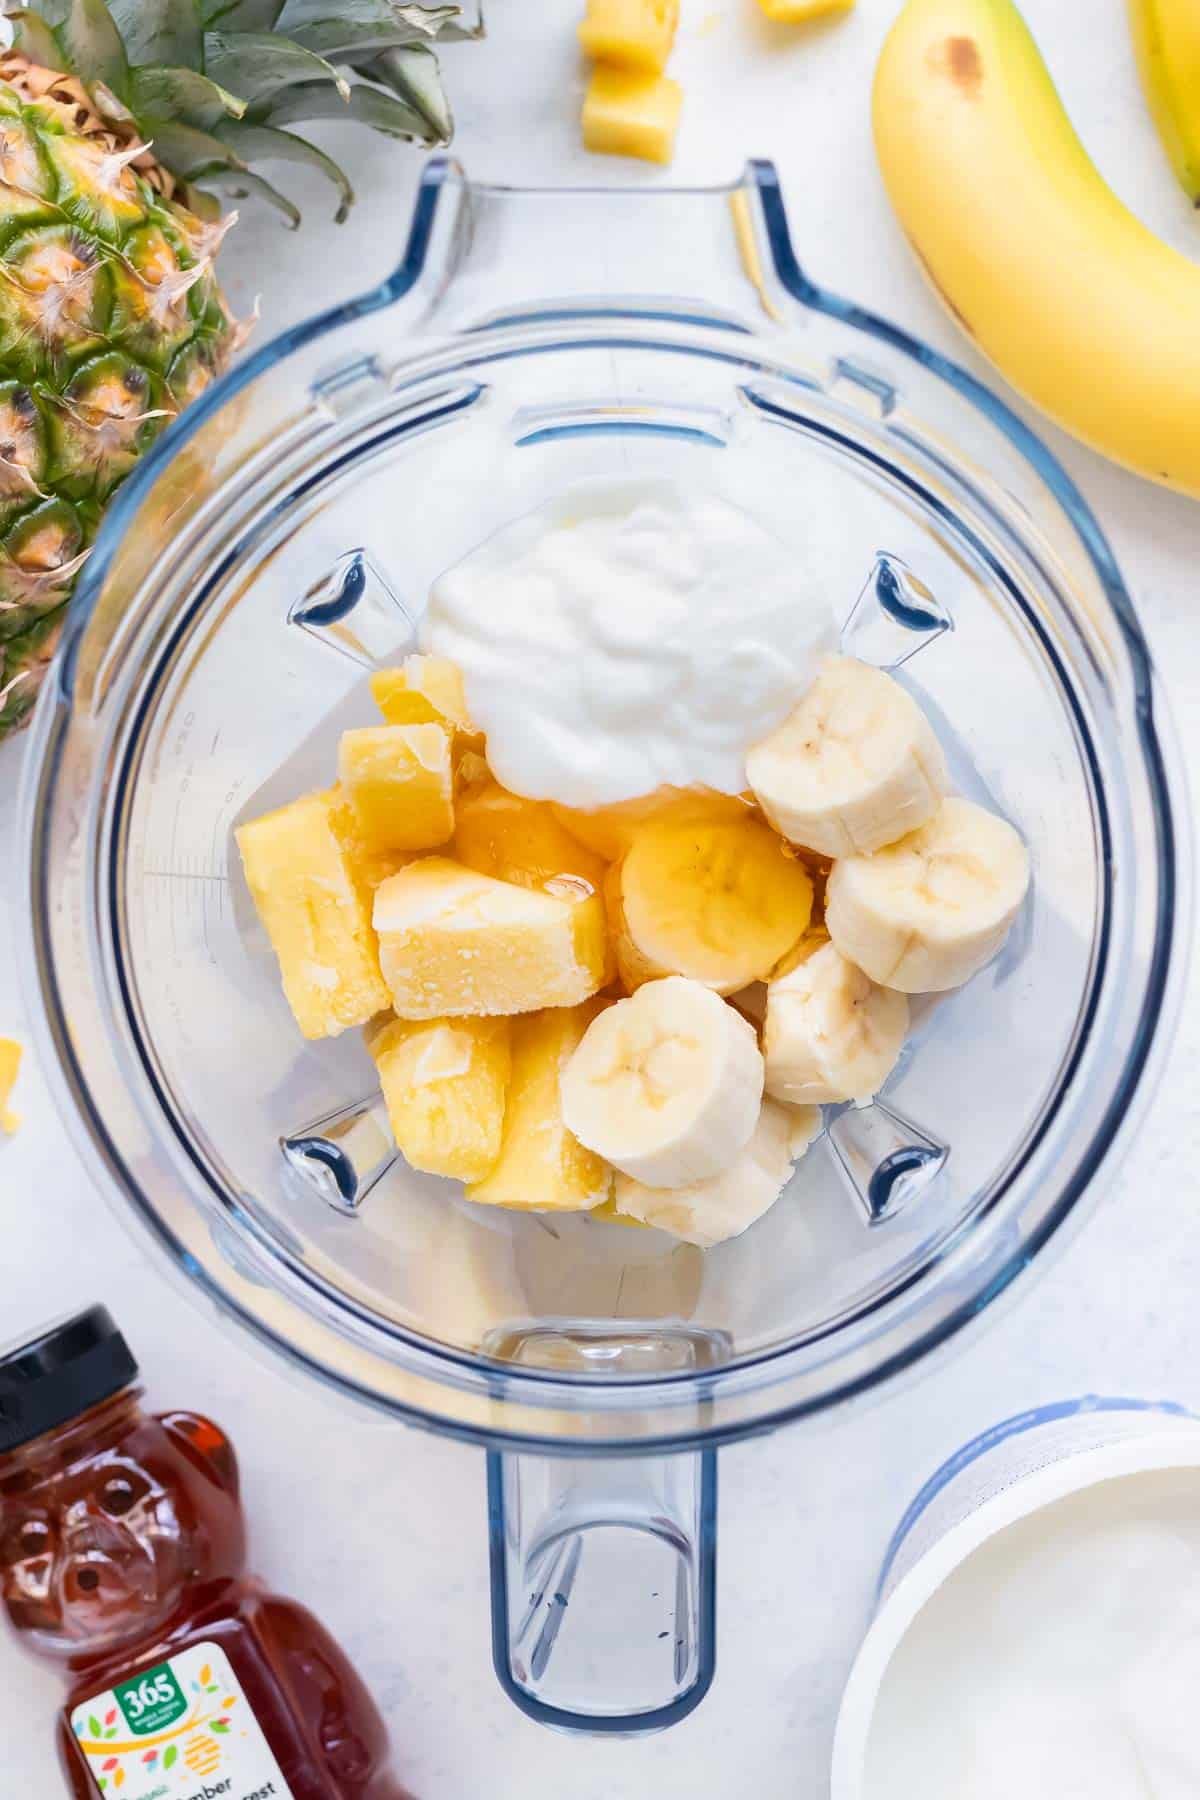 Ingredients for this pineapple coconut smoothie are combined in a blender.